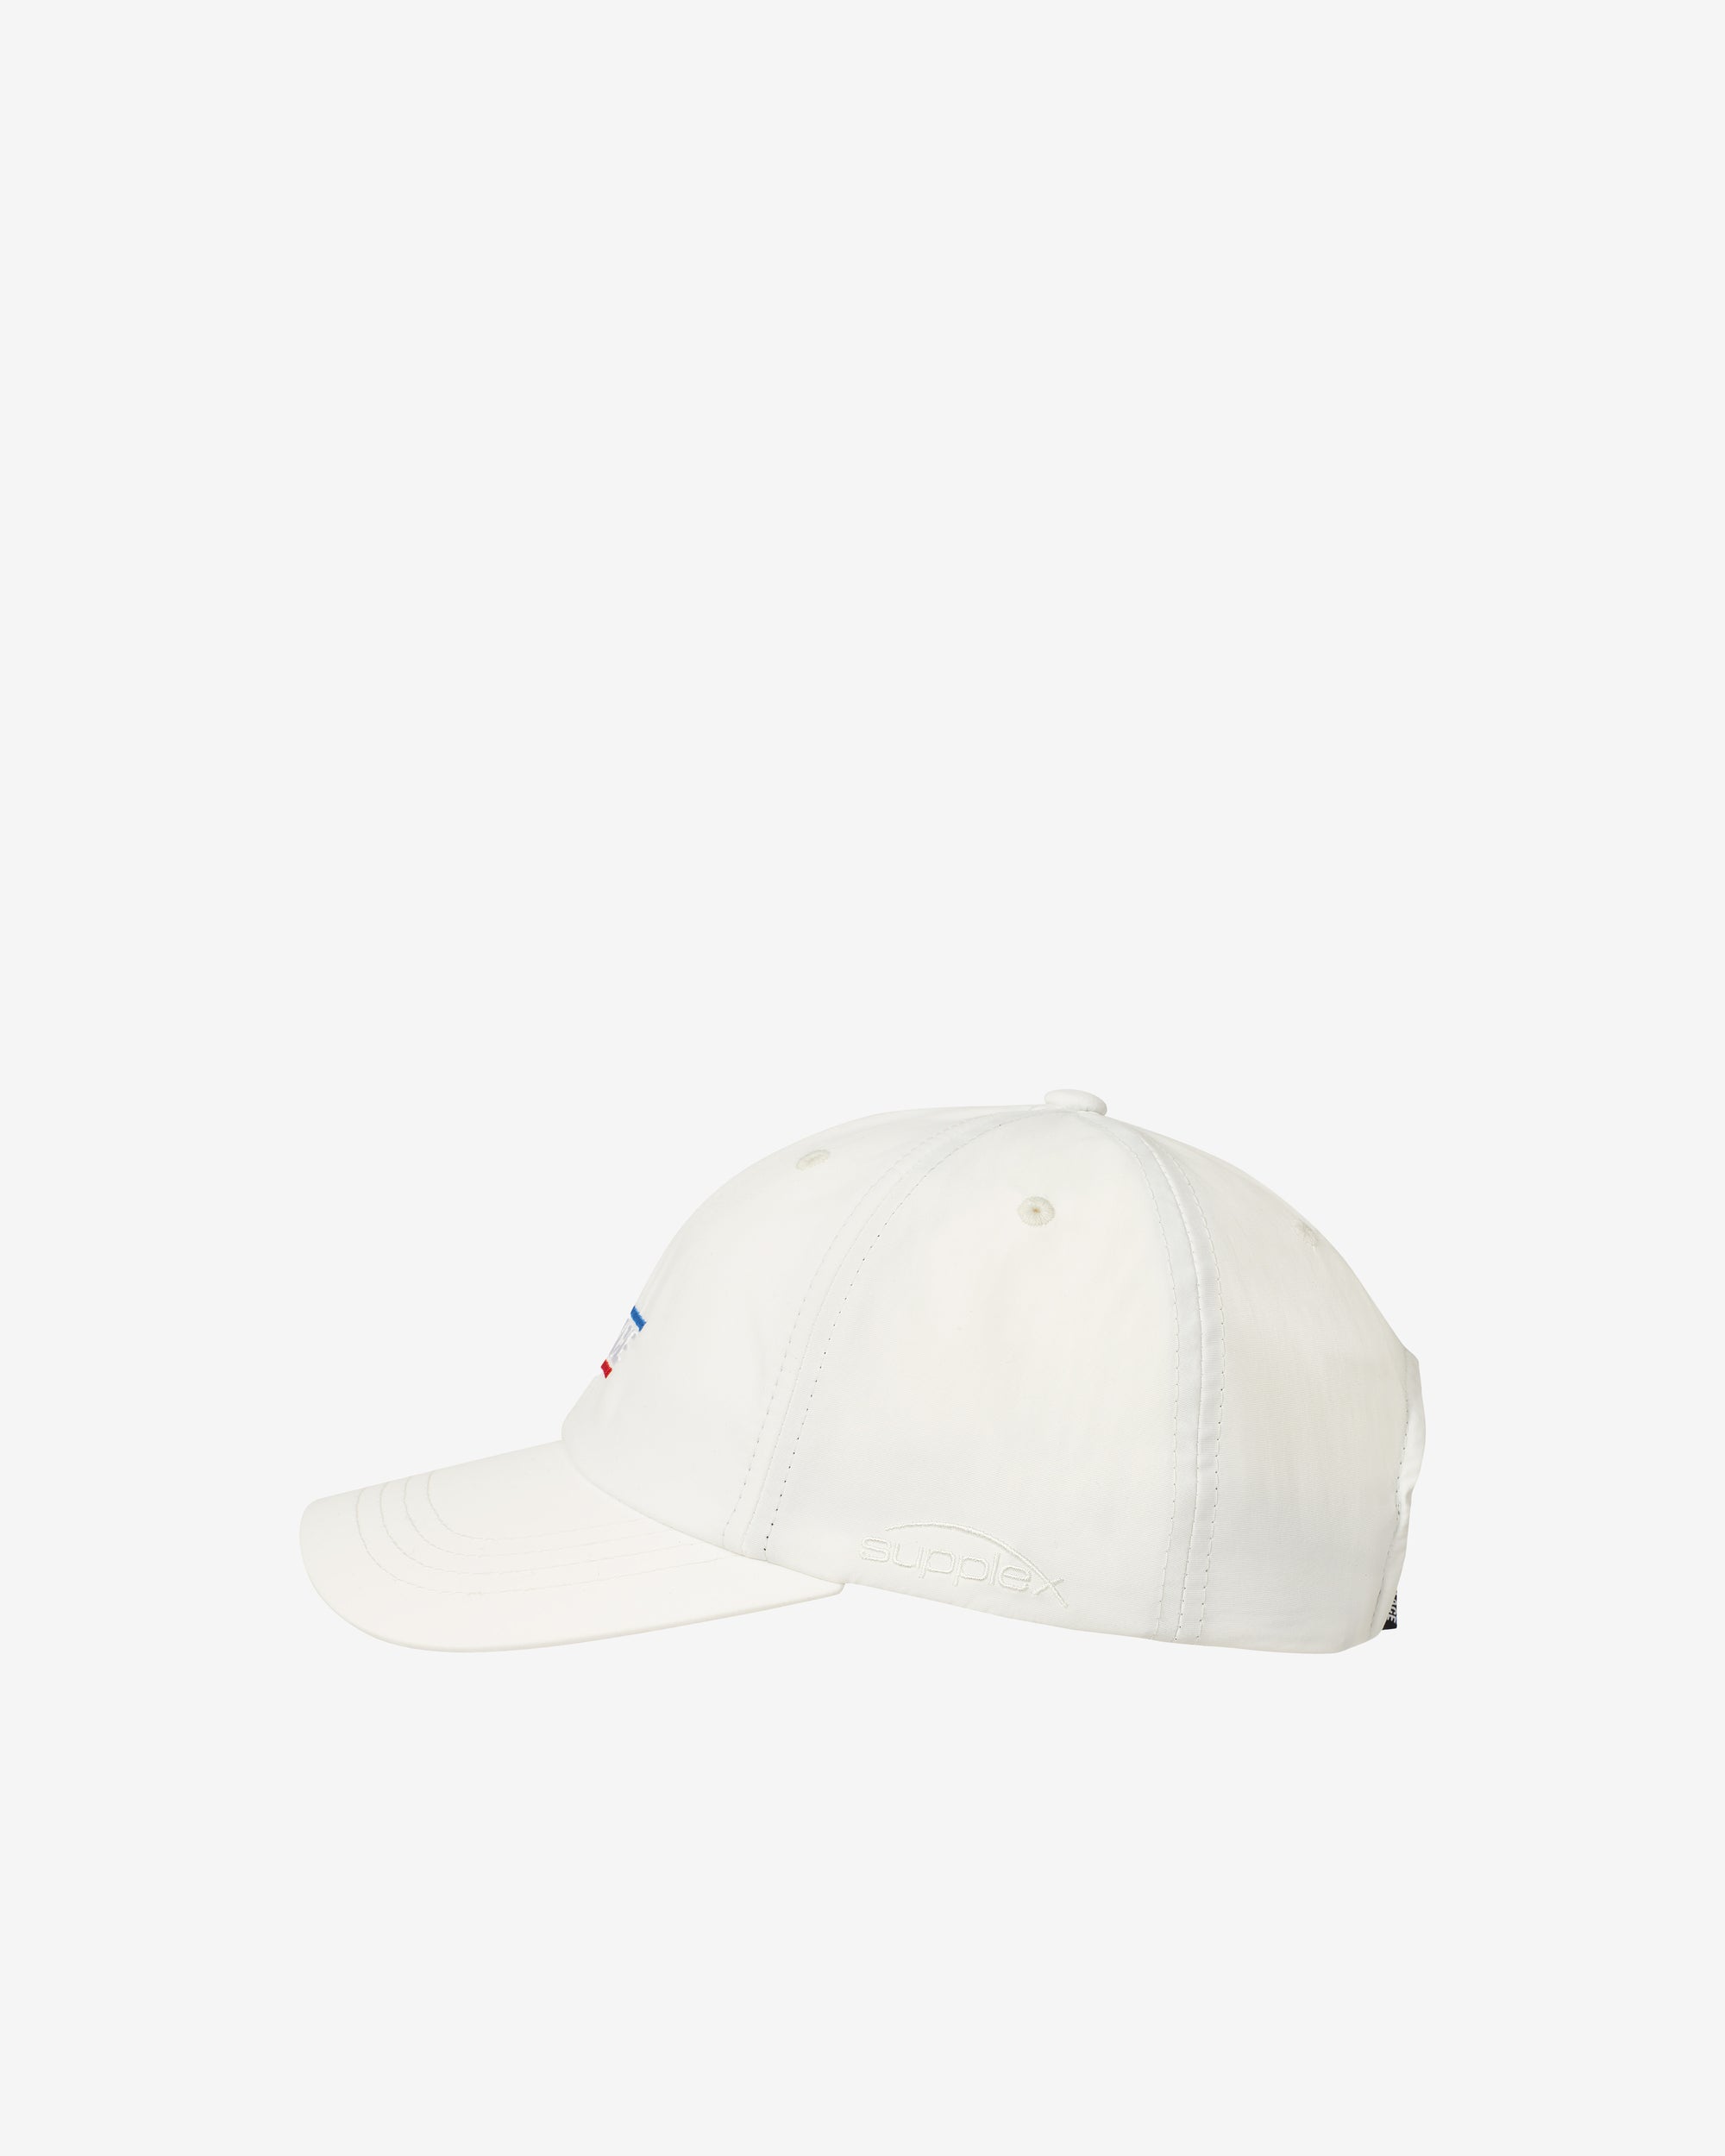 Palace - Men's Basically A Shell 6-Panel - (Soft White) view 2